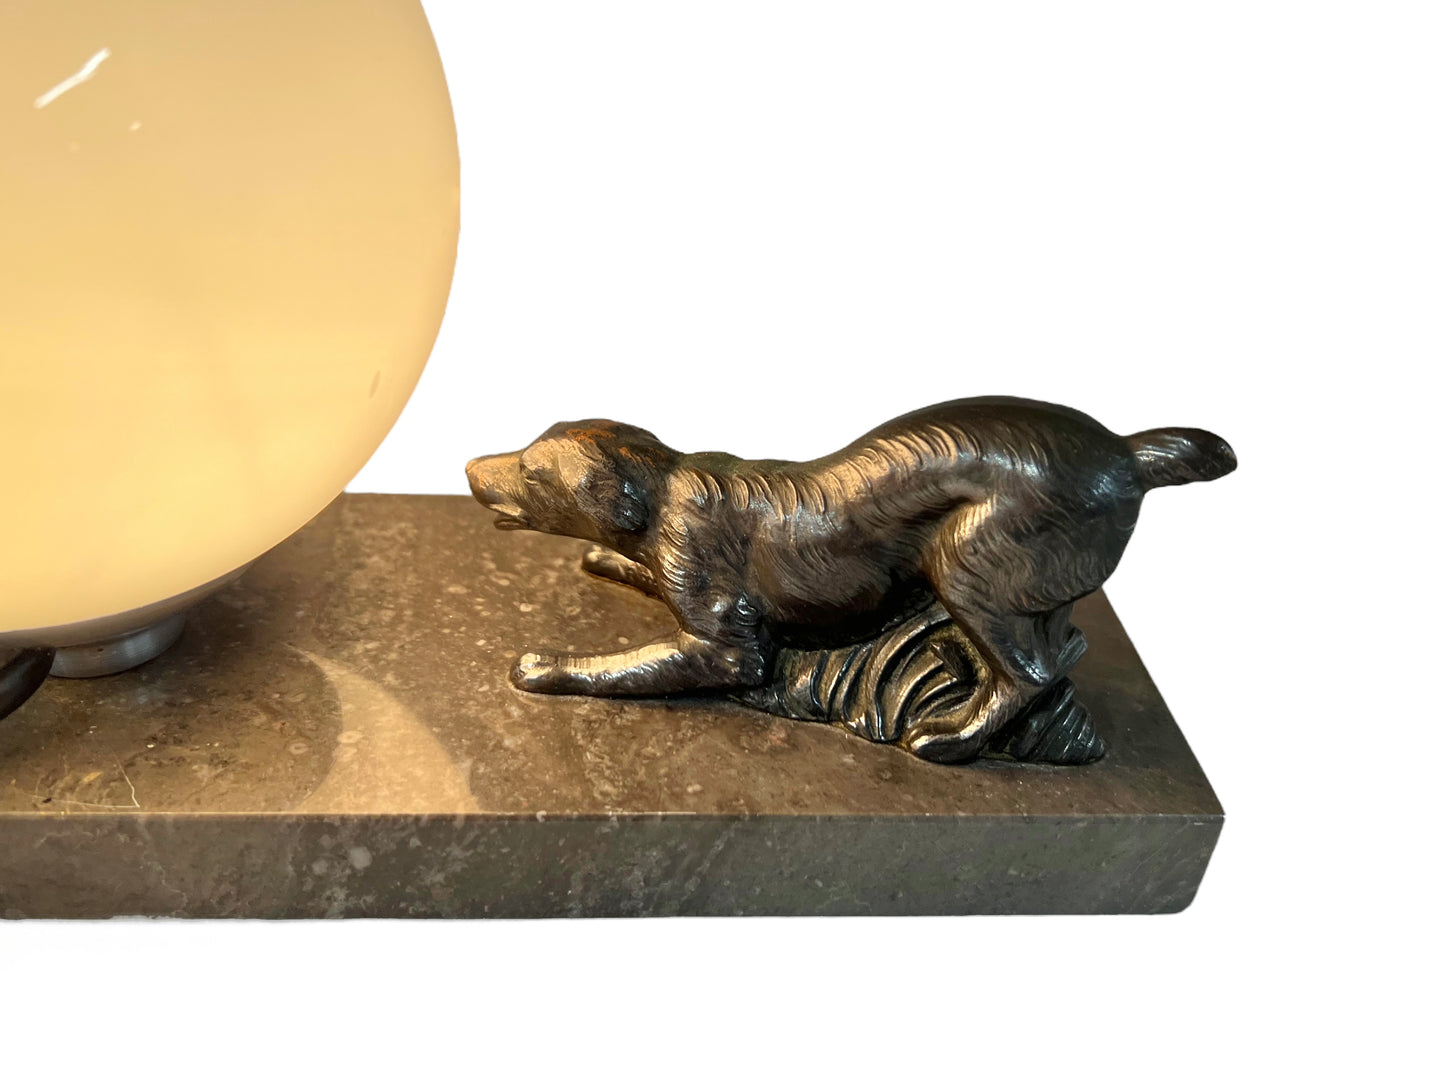 French Art Deco Table Lamp, Vintage French Desk Lamp, Dog Owner Gift (C17)